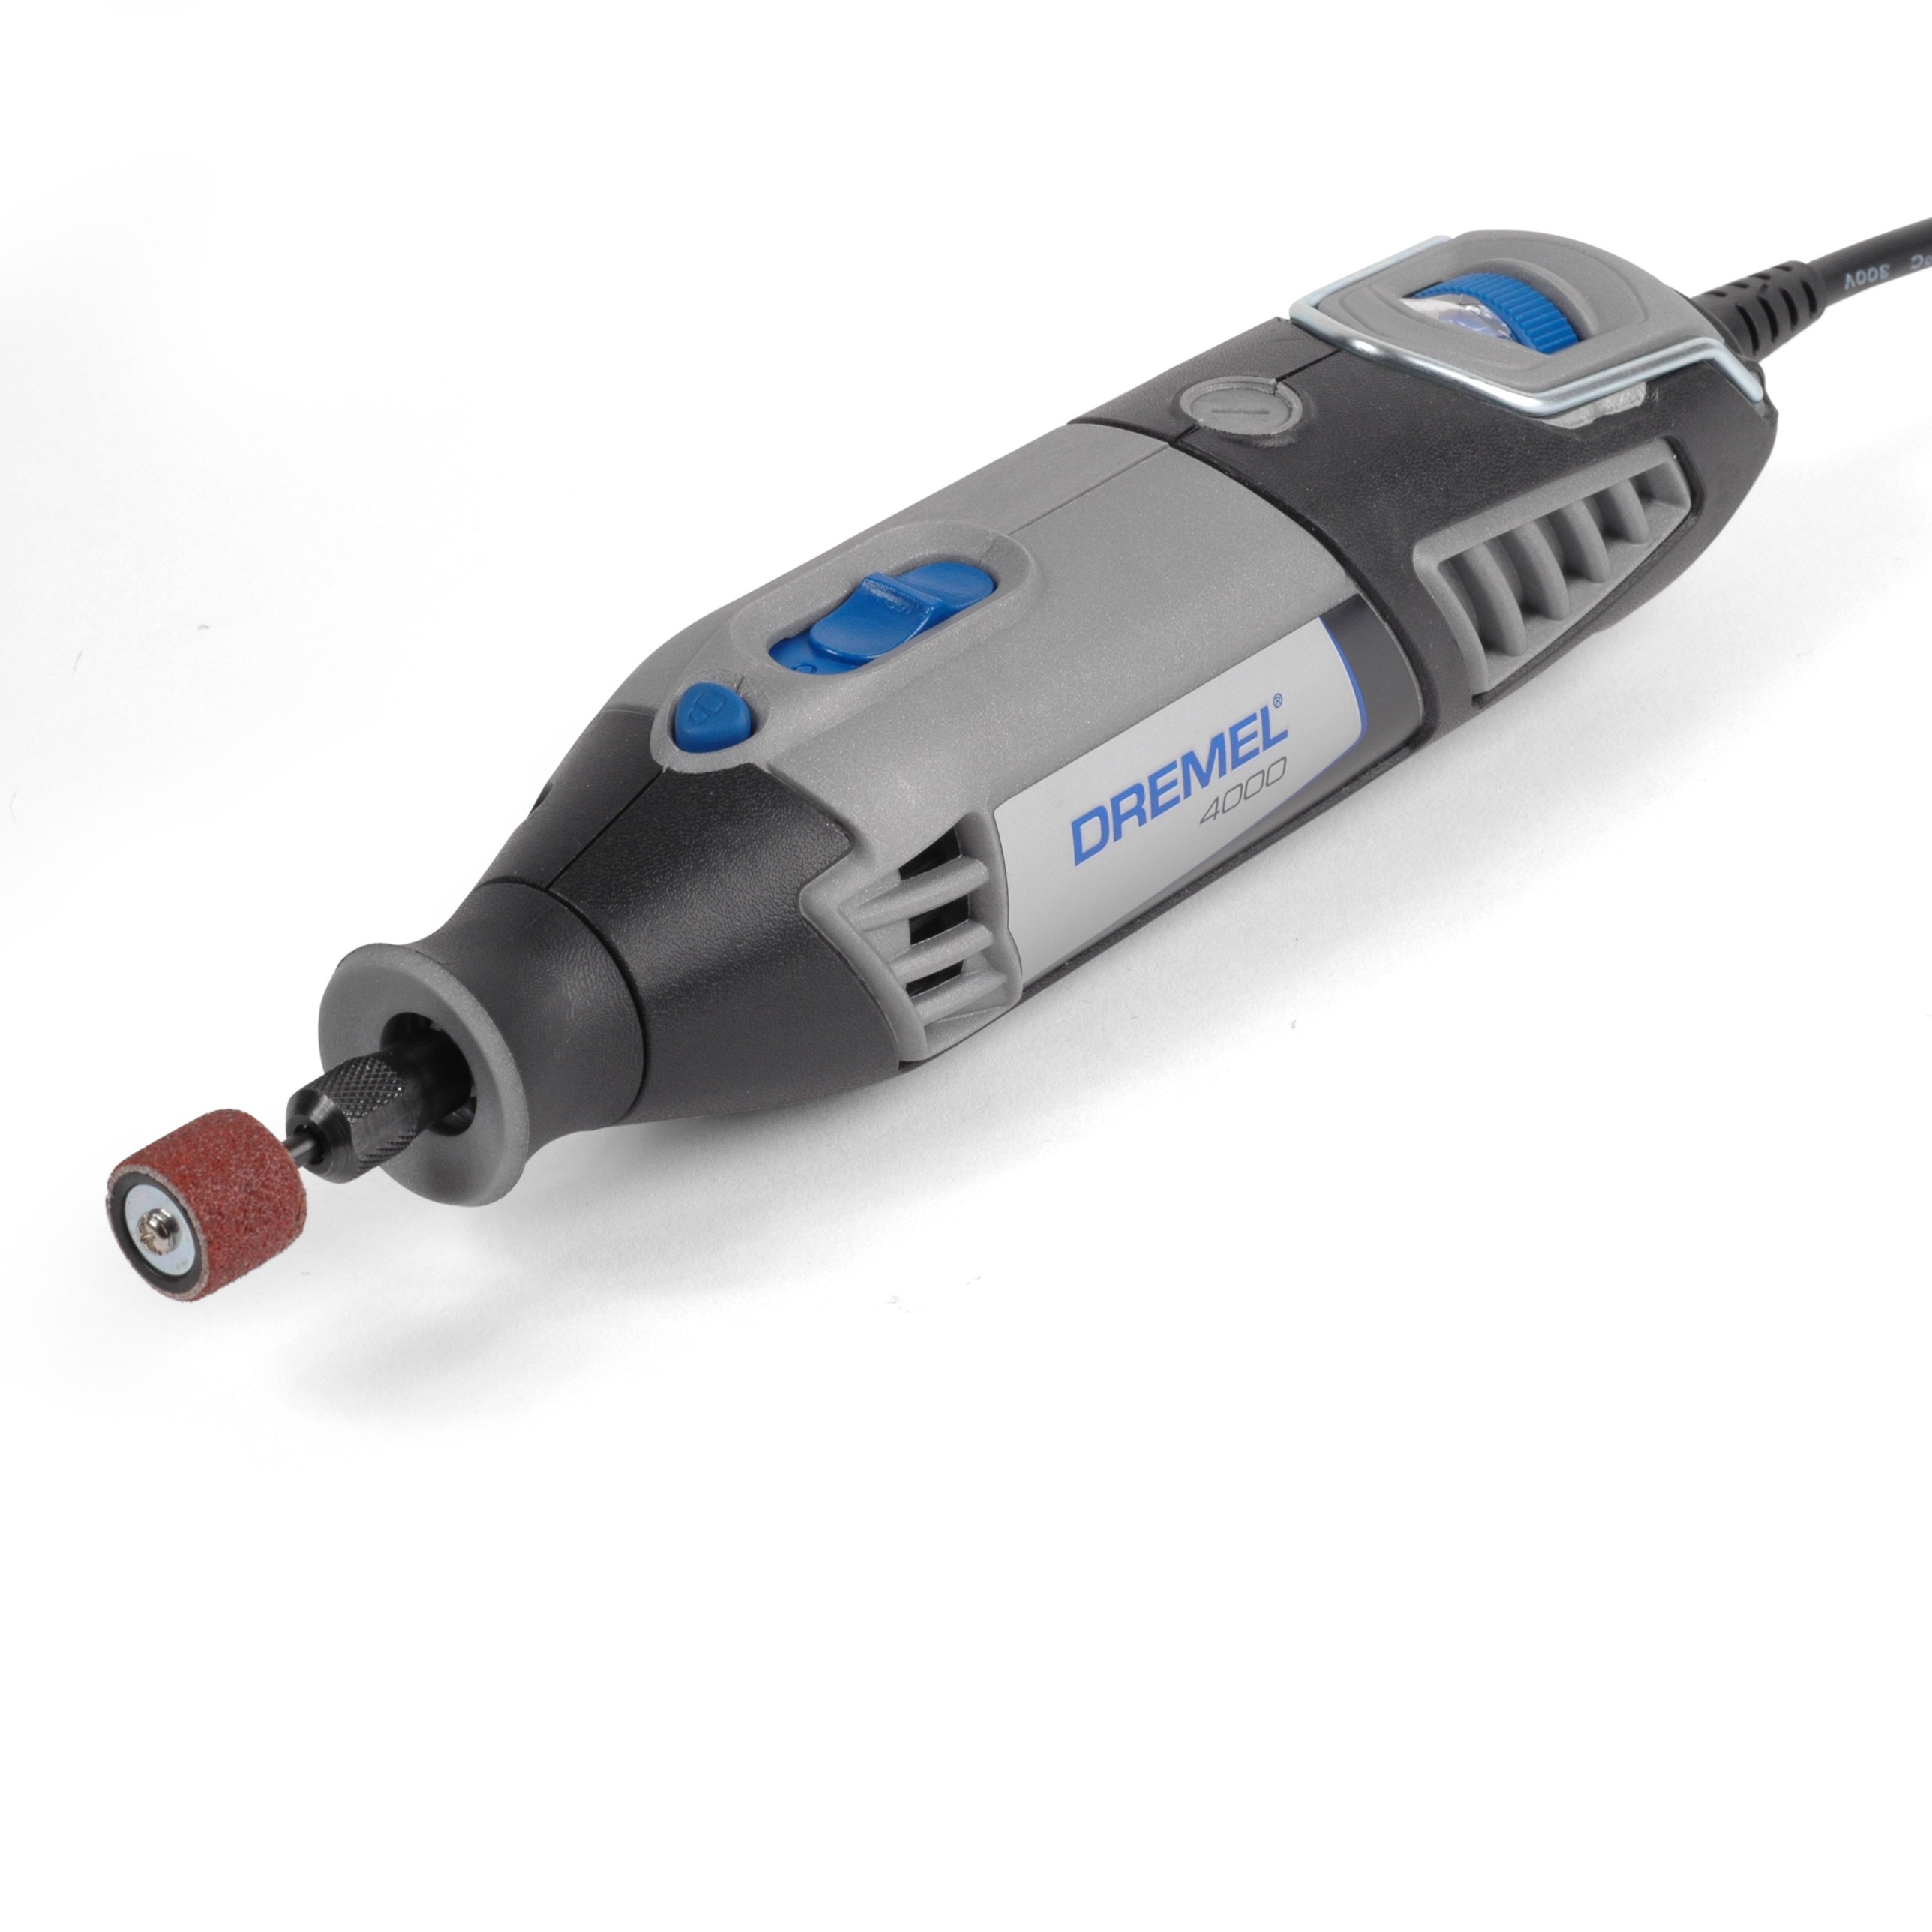 https://www.stewmac.com/globalassets/product-images/m000000/m000100/m000122-dremel-4000-rotary-tool-outfit/0358-1-2500.jpg?hash=637786122070000000